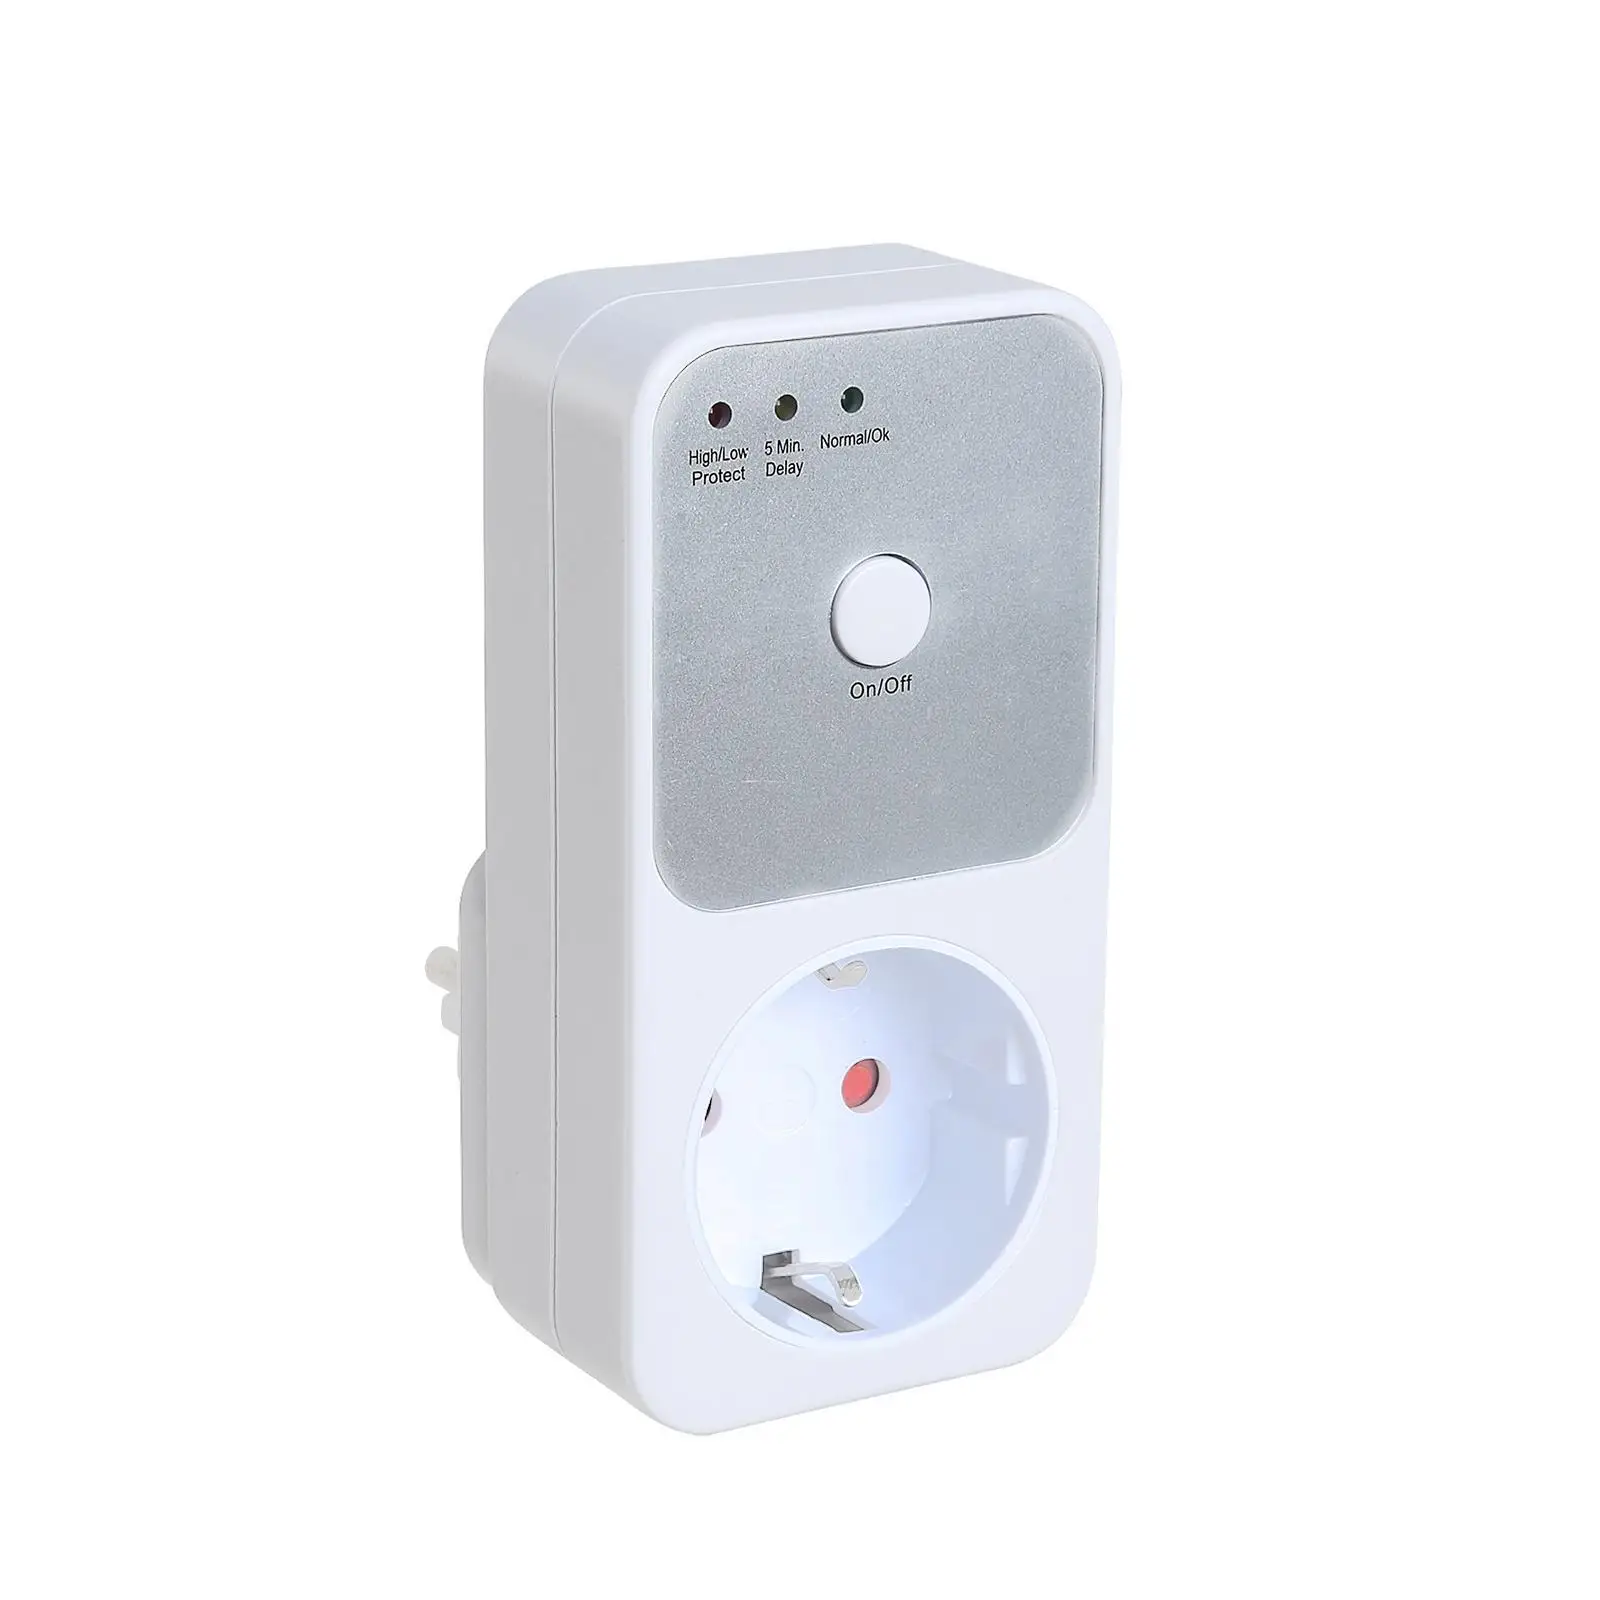 Timing Socket Conserve Socket Smart Timing Plugs Outlet Wireless Mechanical Timer Auto Shut Off for Kitchen Phone Charger Travel